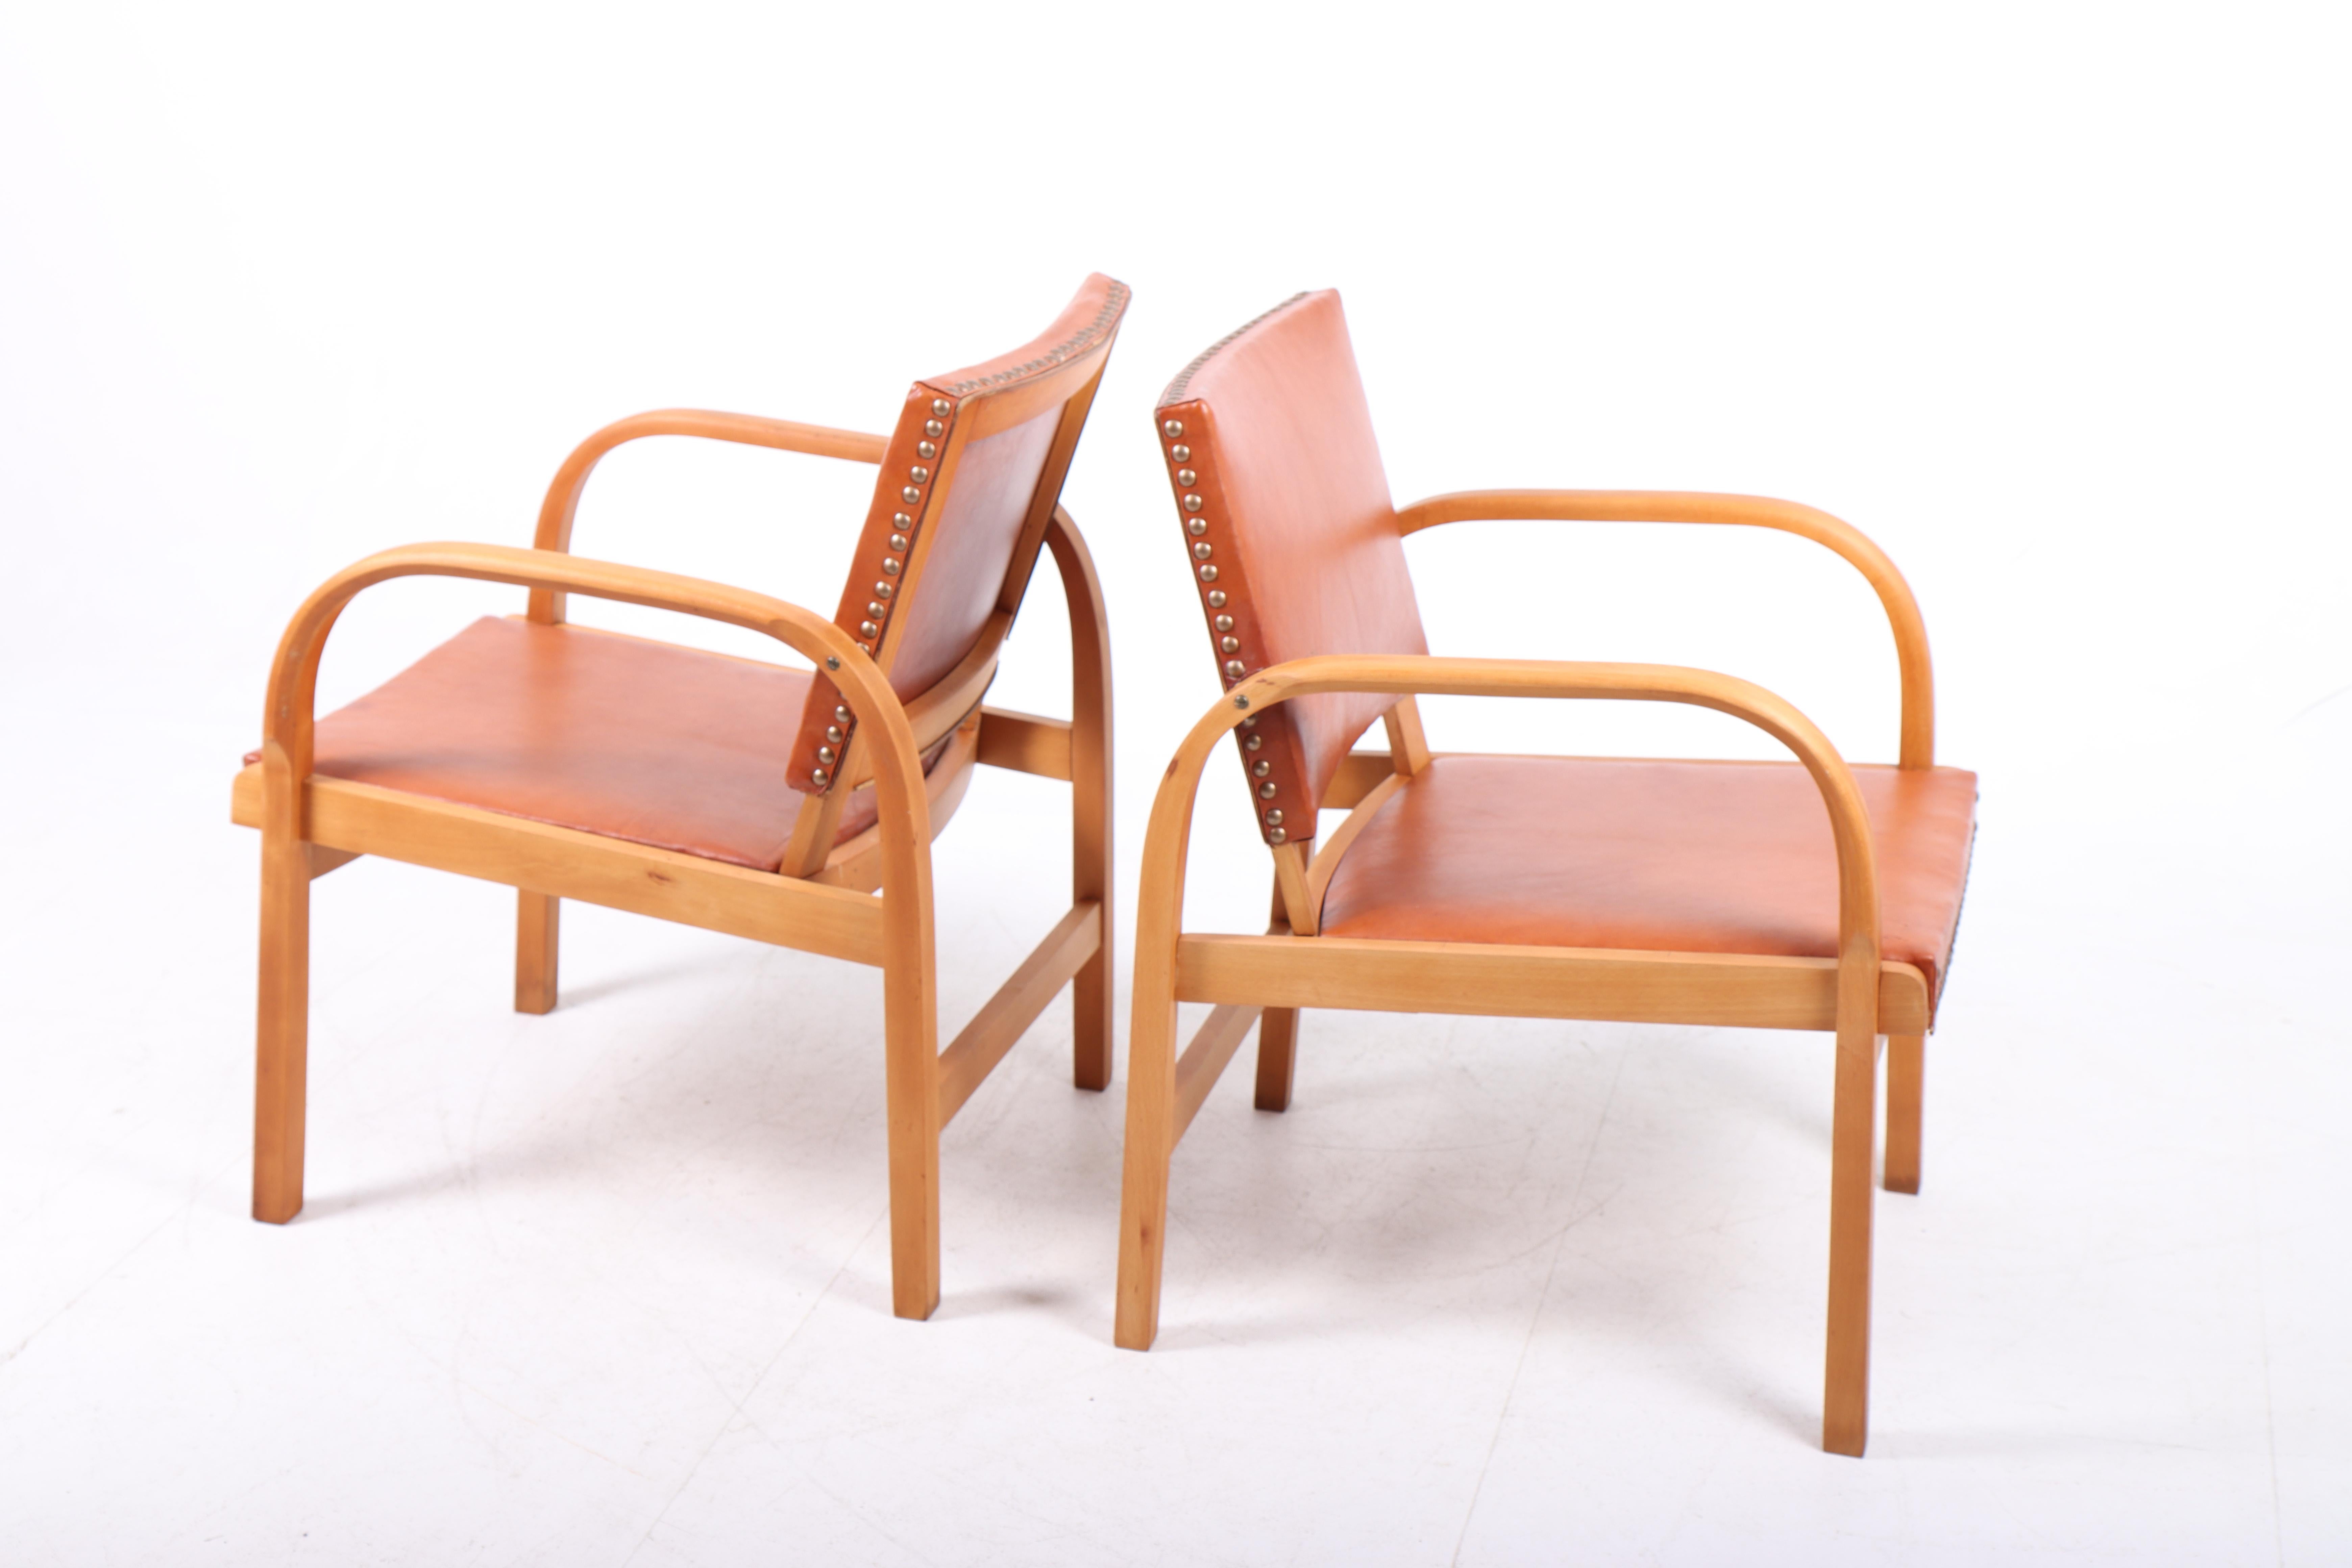 Scandinavian Modern Pair of Danish Lounge Chairs by Magnus L. Stephensen, 1940s For Sale